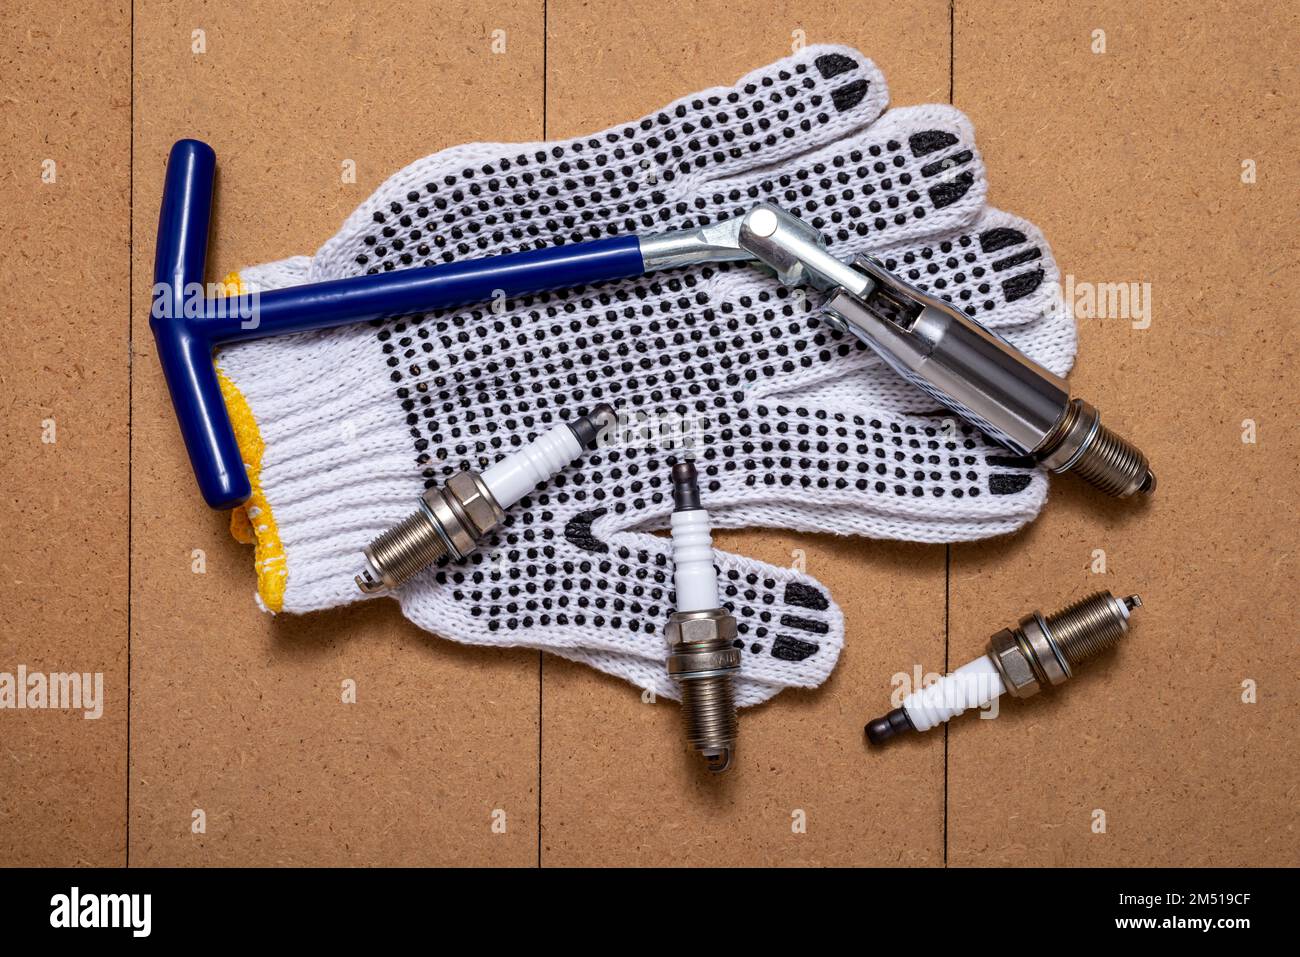 Sparking plugs, spark plug key and protective gloves on wooden table. Stock Photo